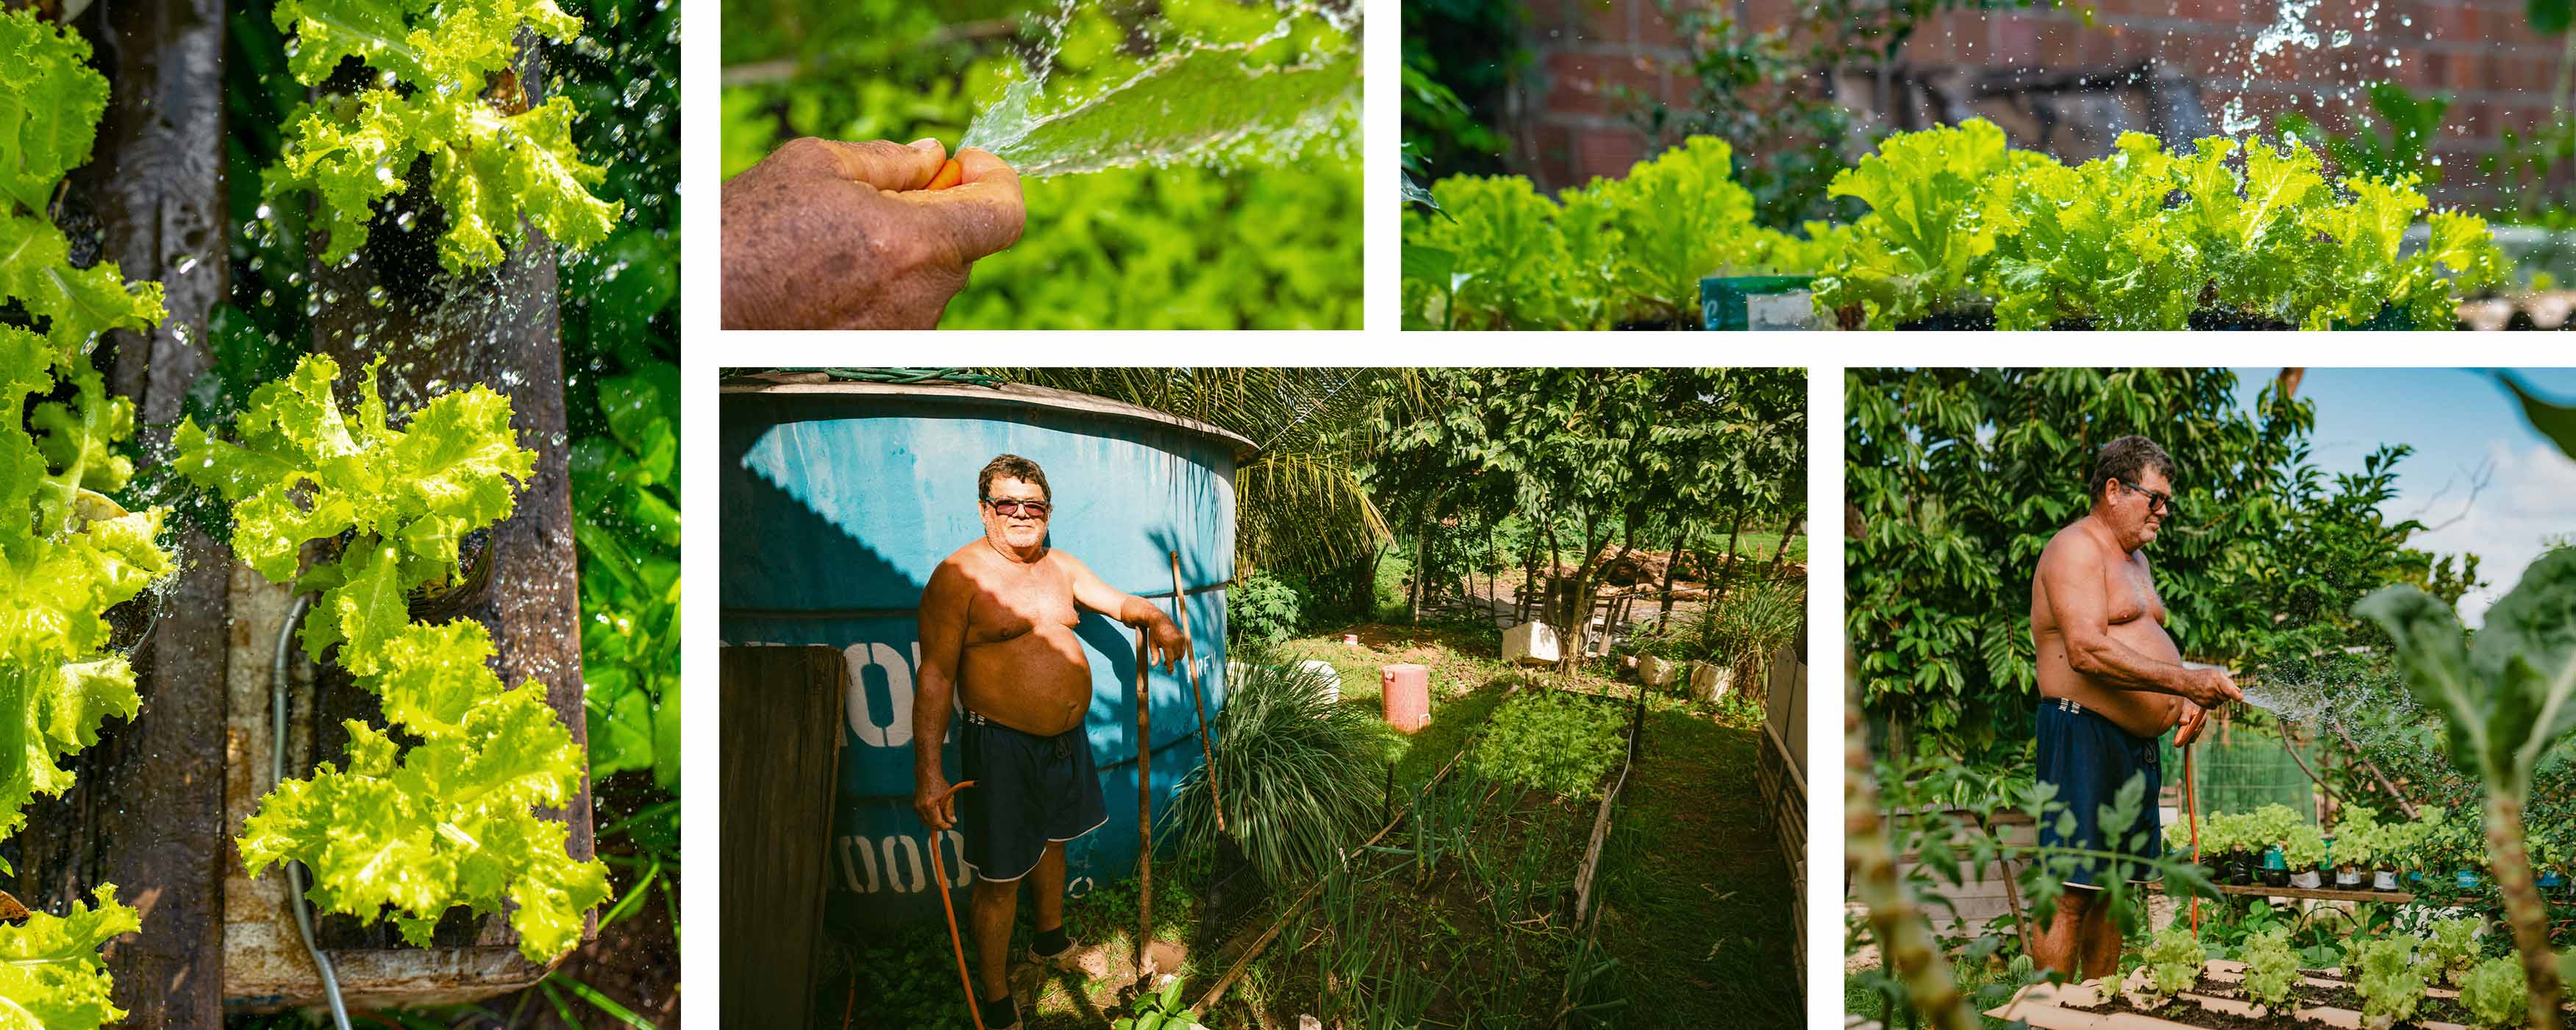 Islanders such as Antonio Jose da Silva (pictured) now have enough fresh water to grow their own vegetables.